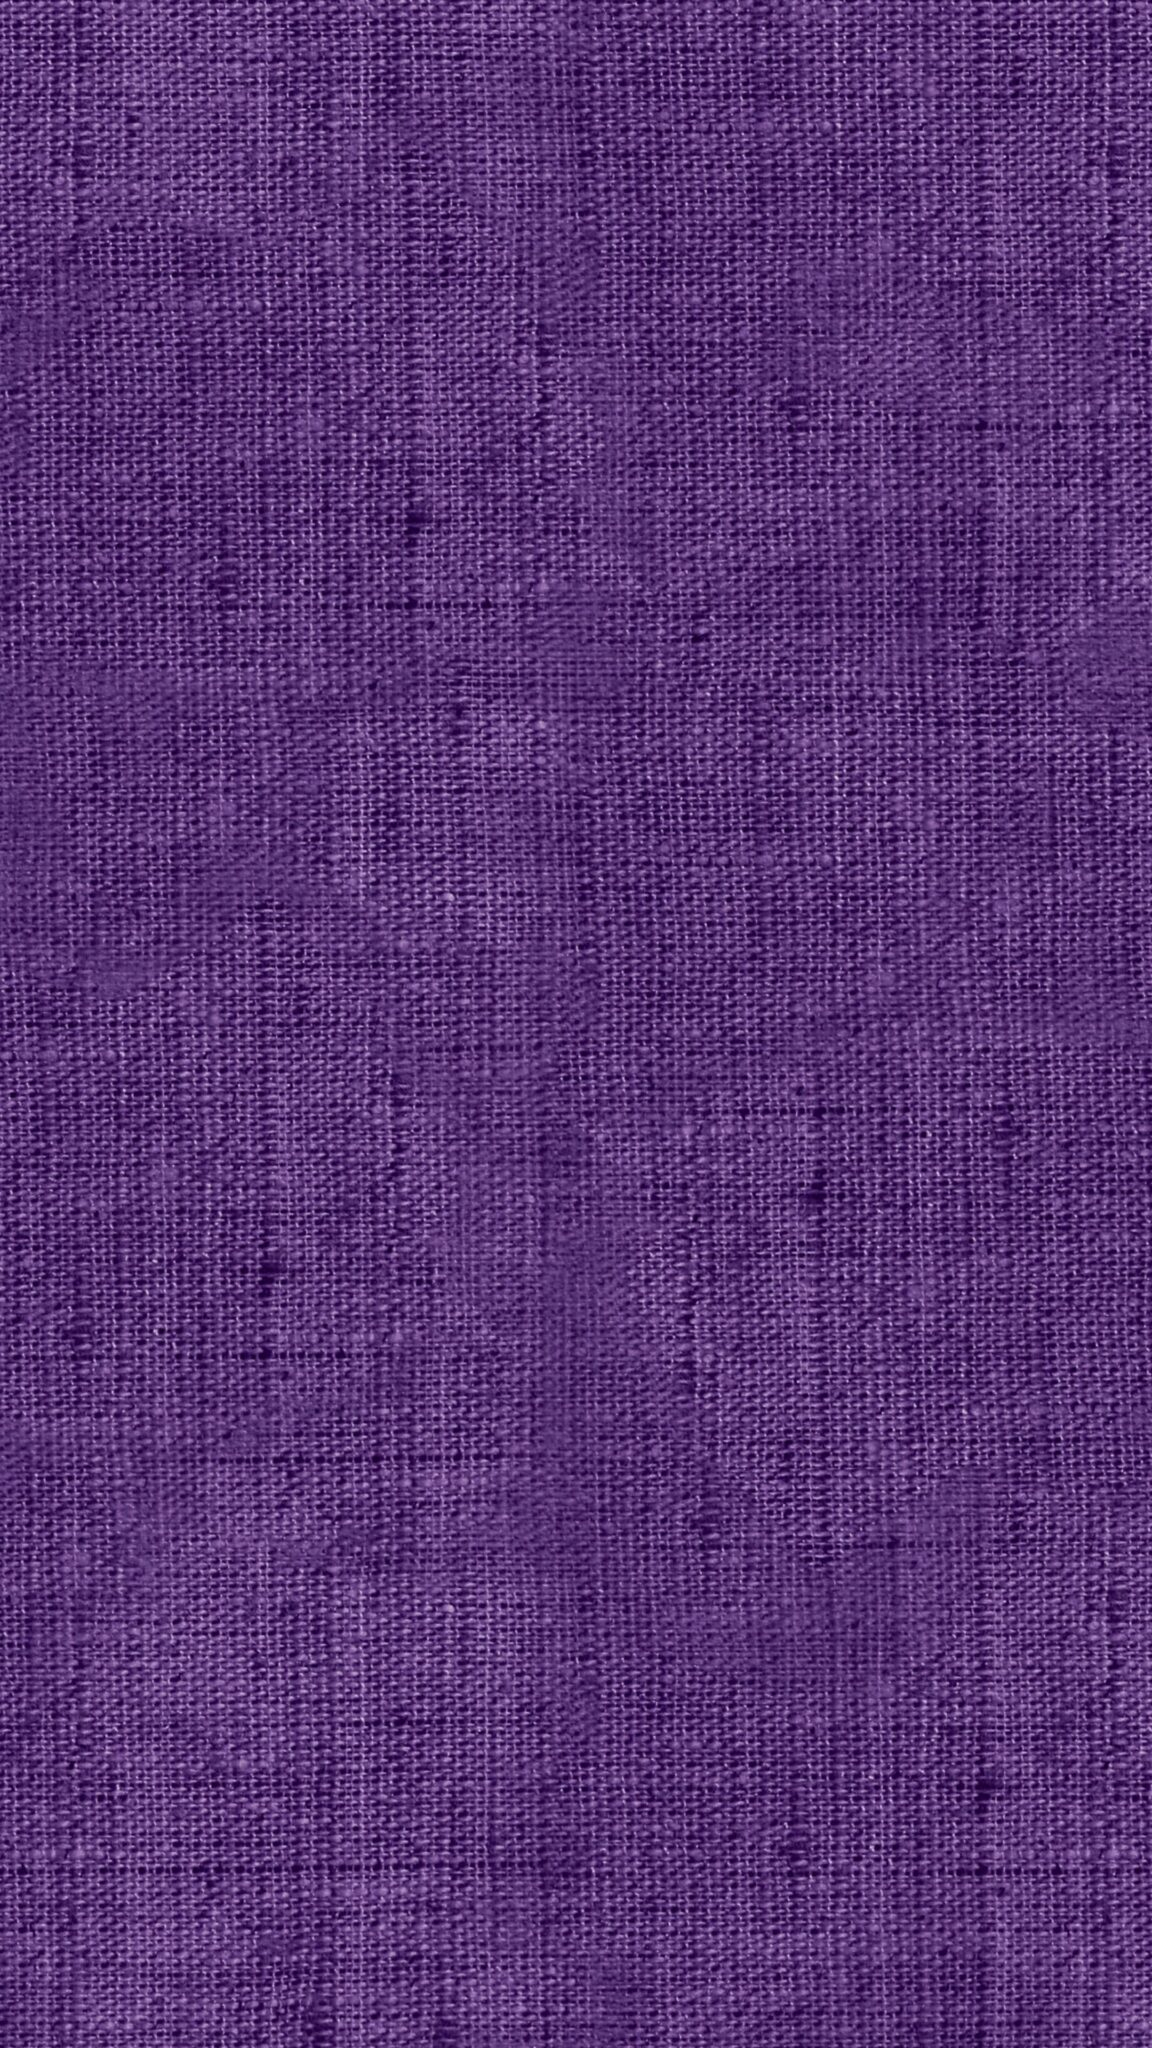 1152x2048 Violet Wallpaper Texture Seamless For Mobile Phone Wallpaper Download Full HD